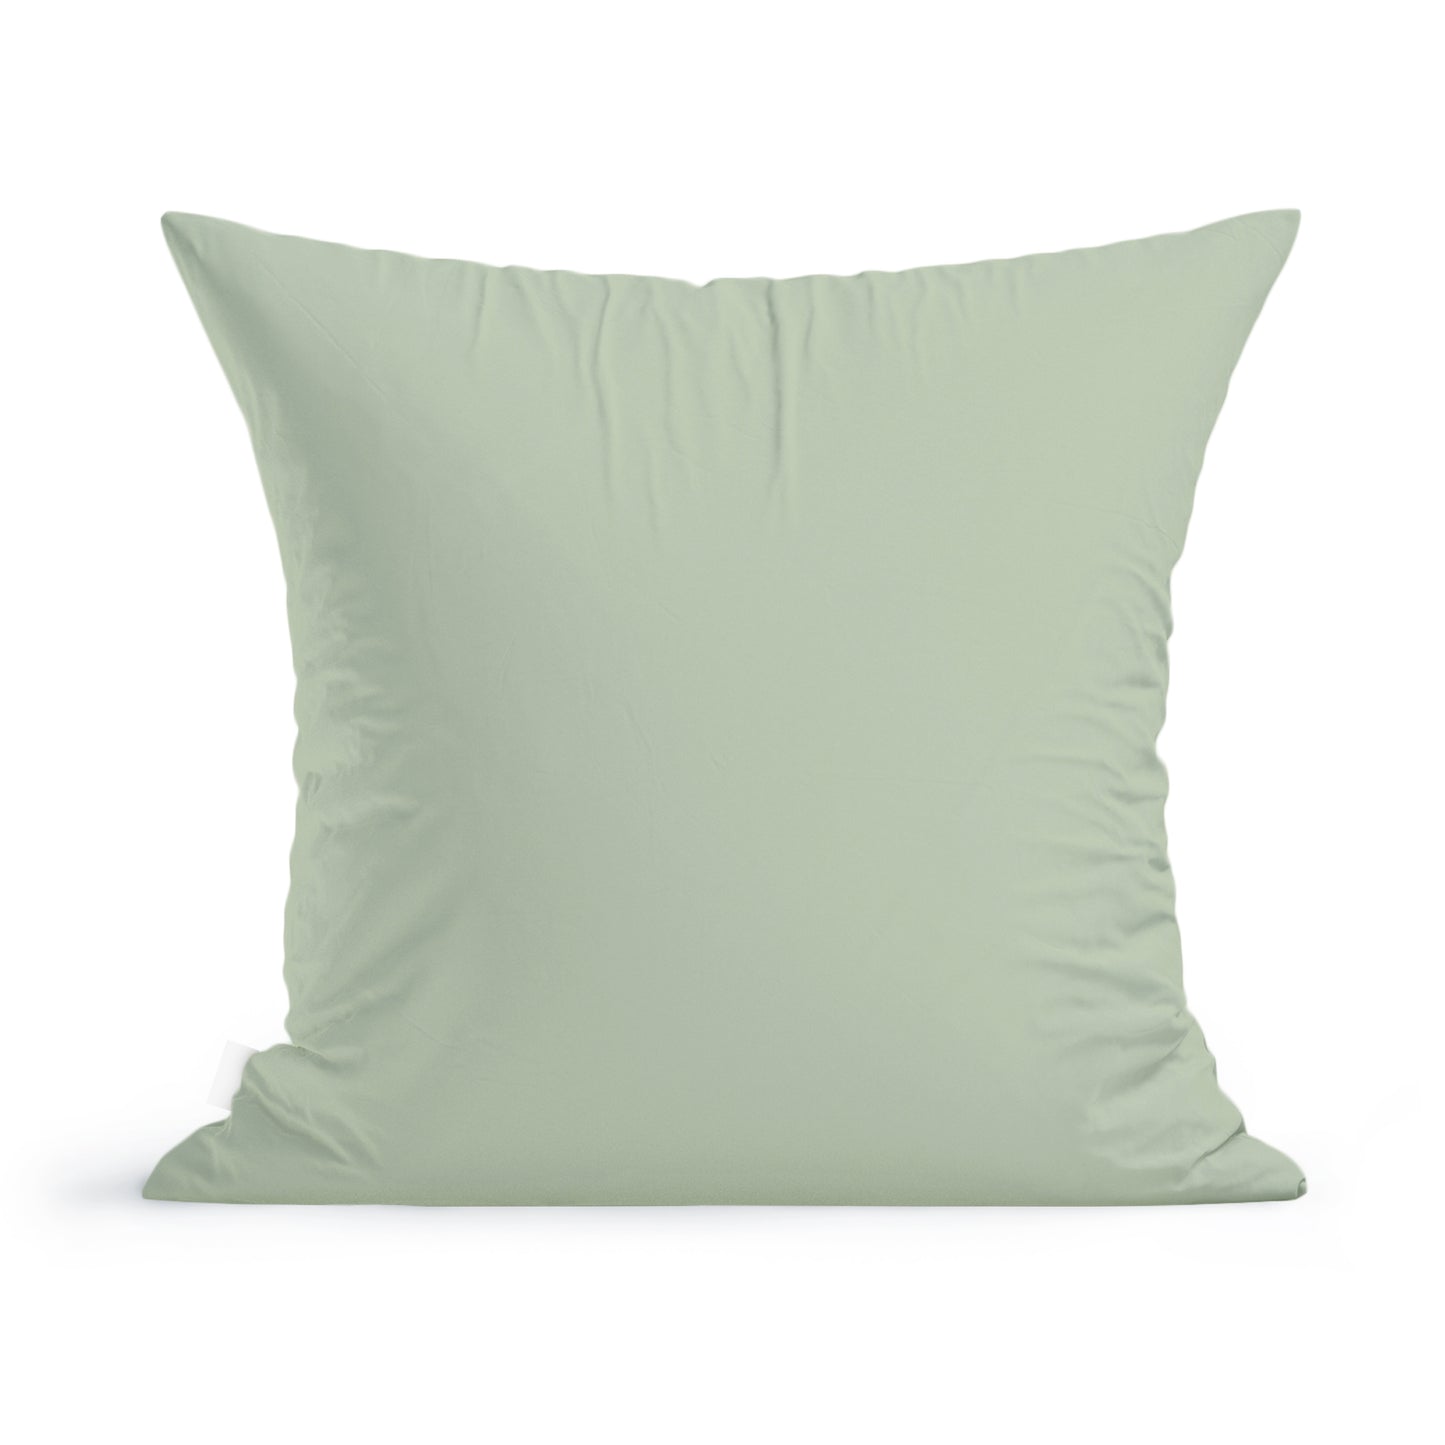 A plain light green cotton square Fresh Florals Pillow by Rustic County isolated on a white background.